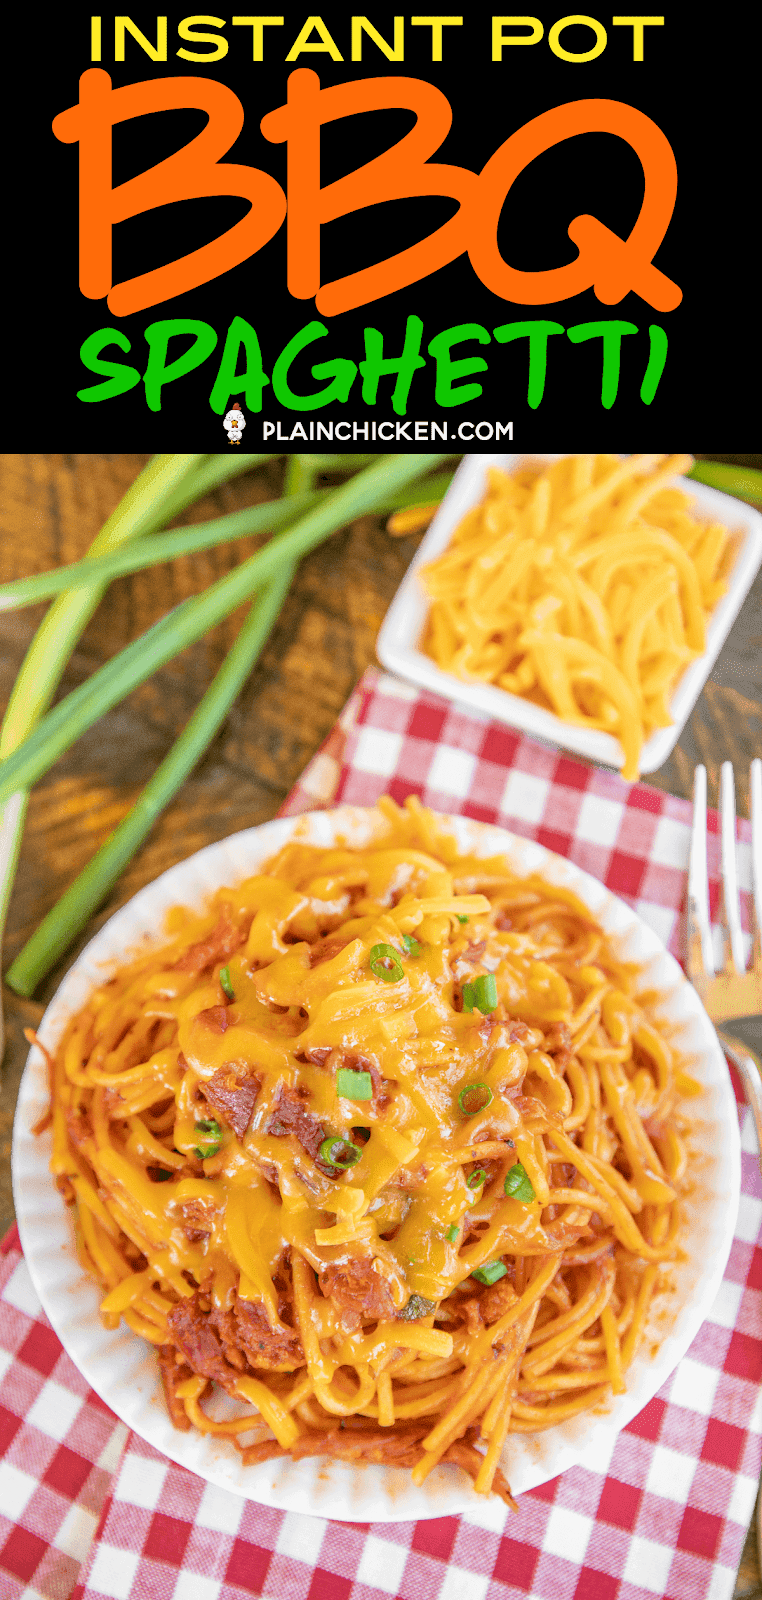 bbq spaghetti topped with cheese and onions on a plate